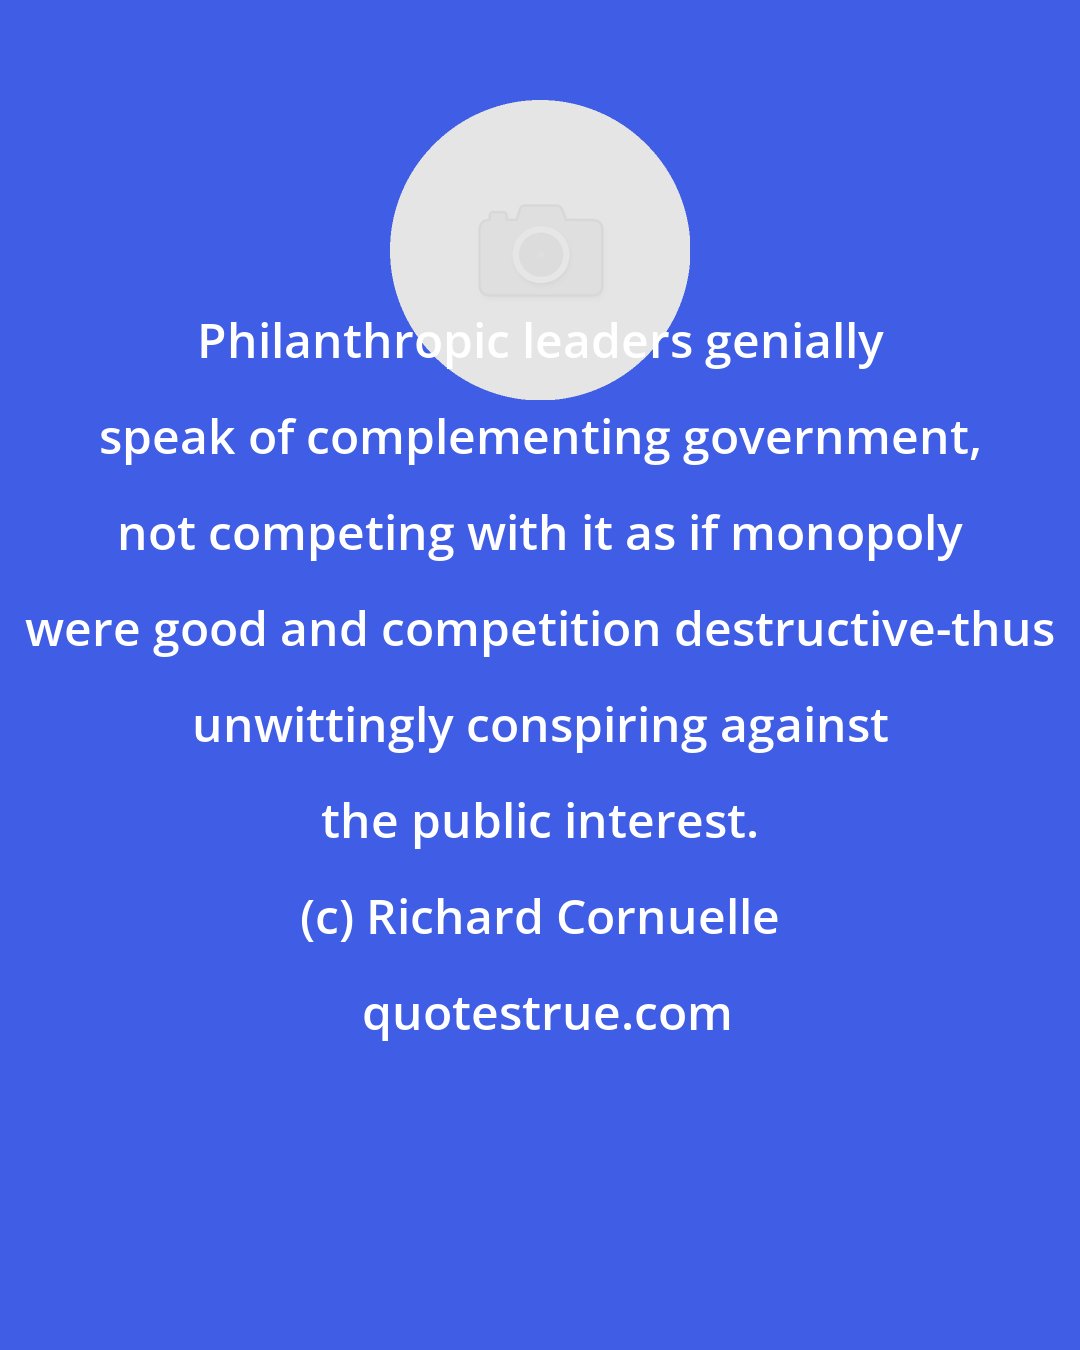 Richard Cornuelle: Philanthropic leaders genially speak of complementing government, not competing with it as if monopoly were good and competition destructive-thus unwittingly conspiring against the public interest.